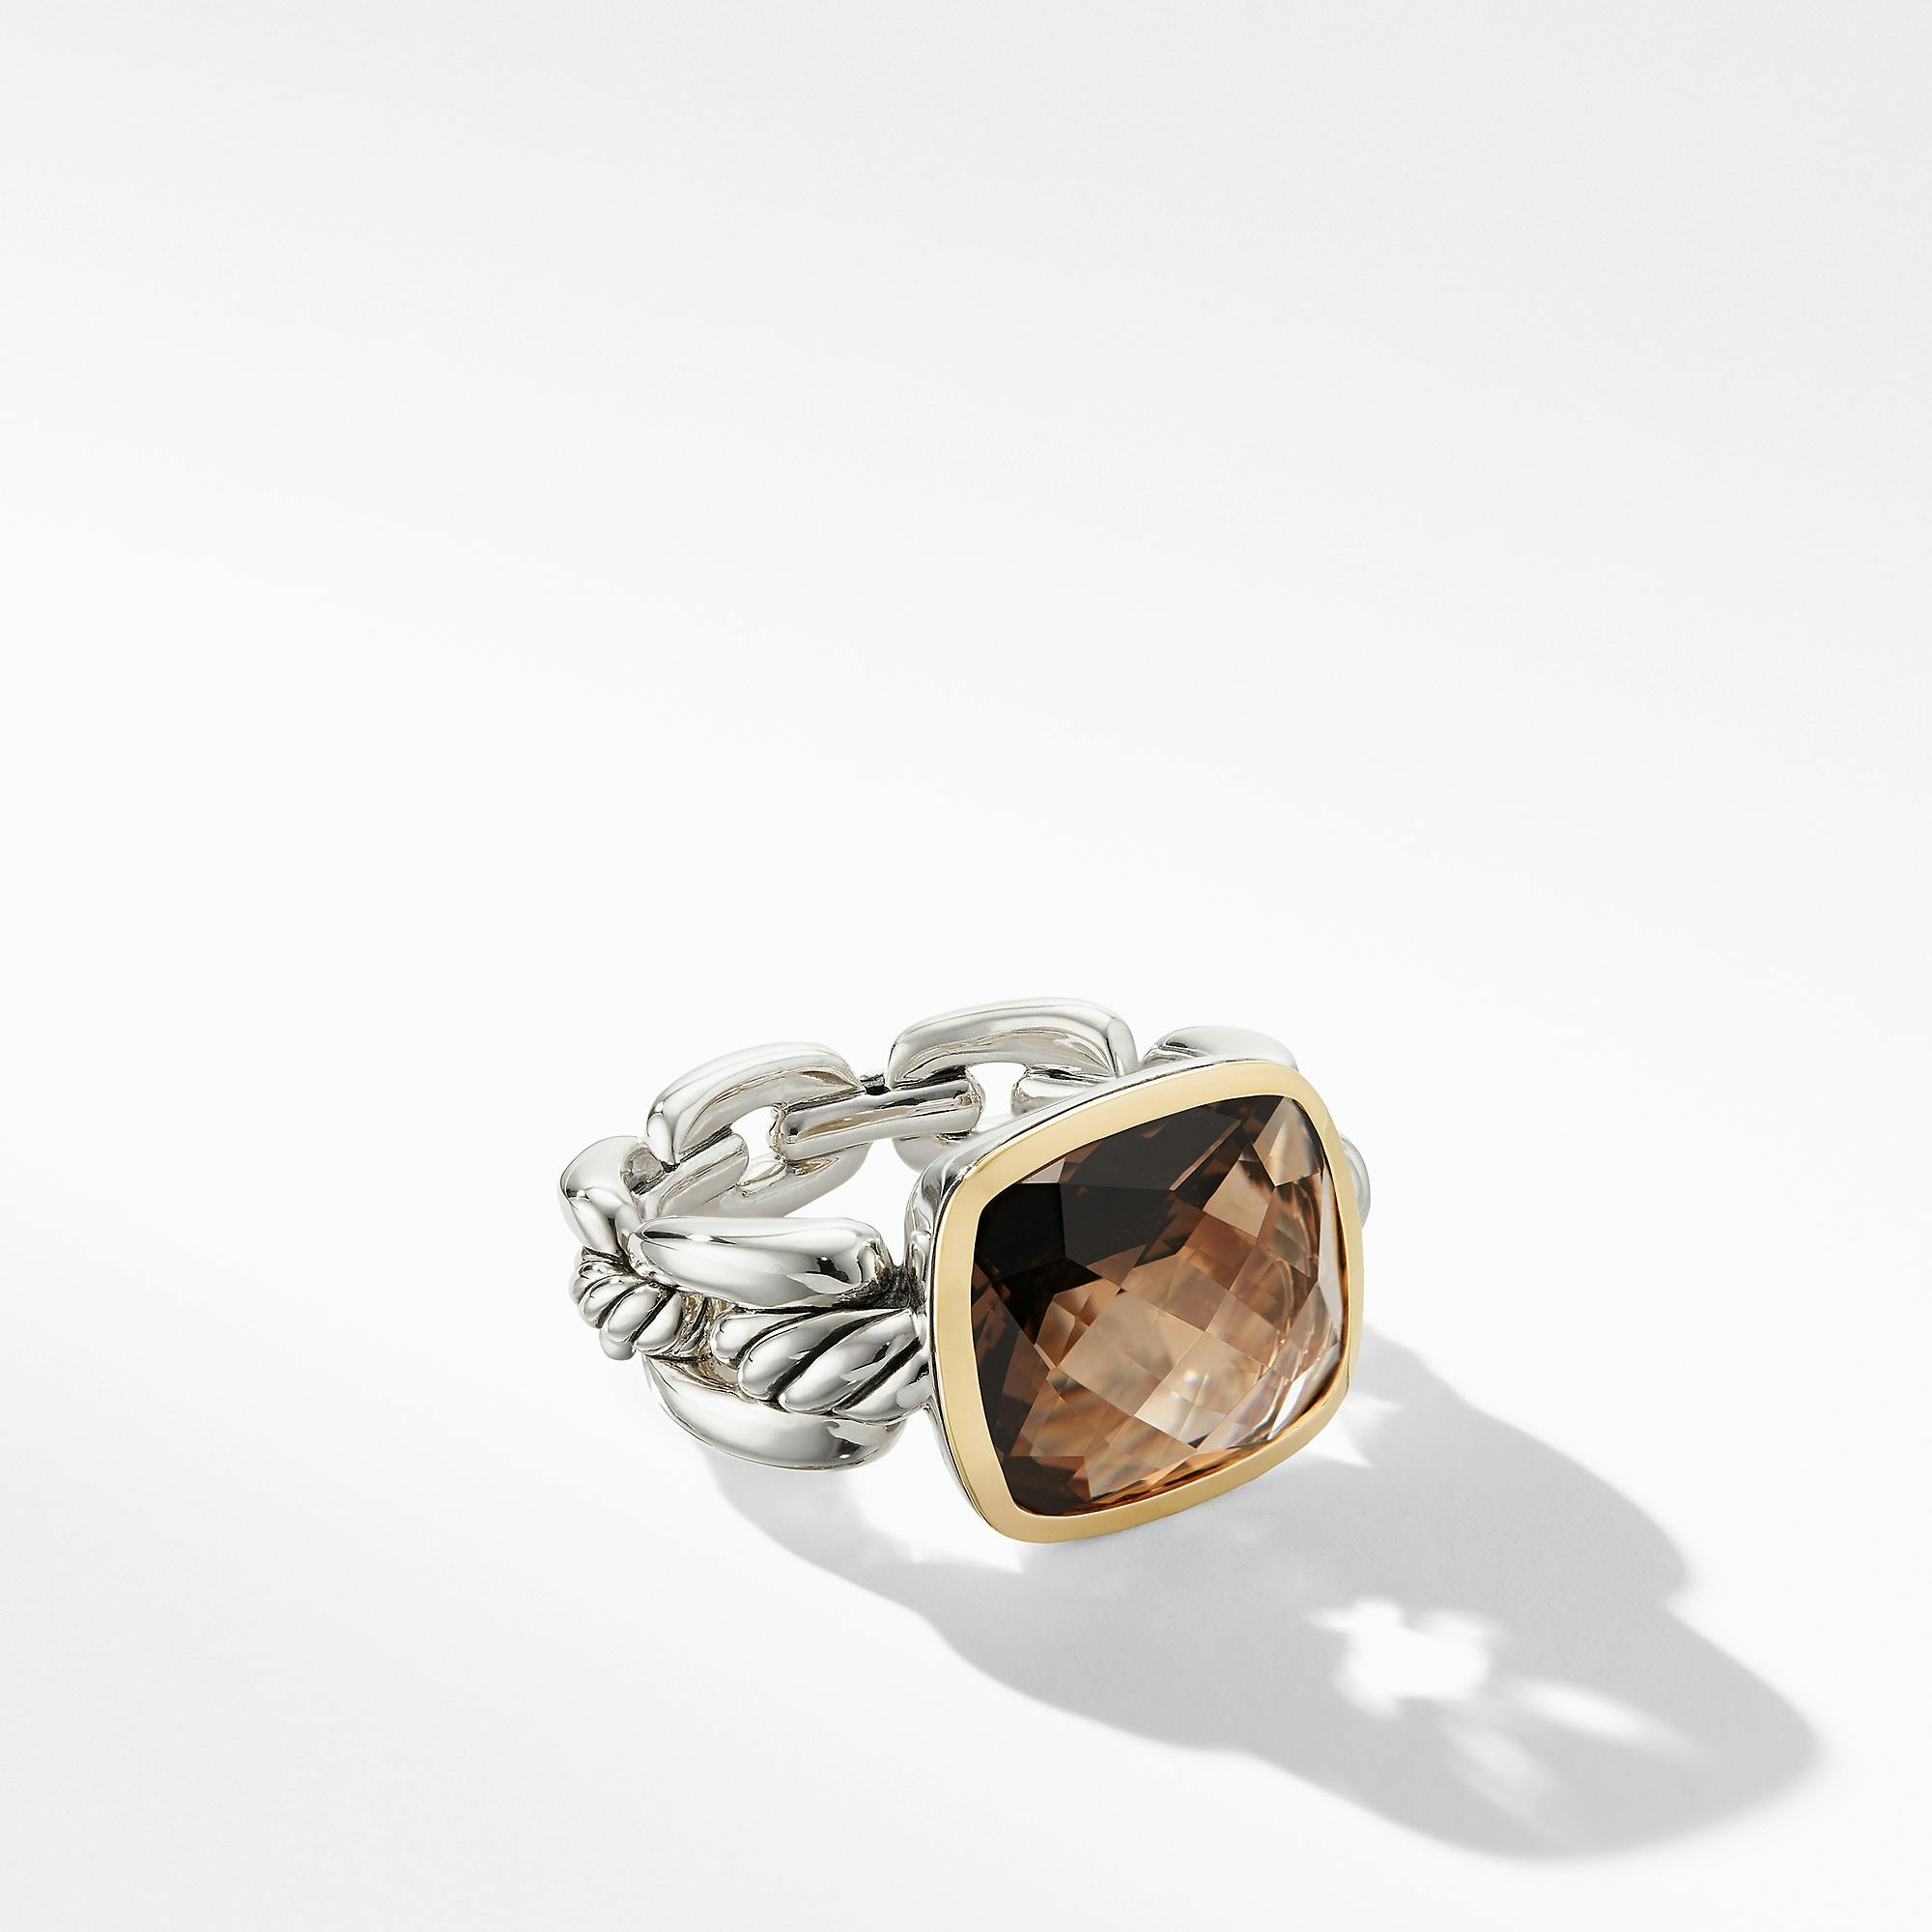 David Yurman Wellesley Link Statement Ring with 18K Gold and Smoky Quartz